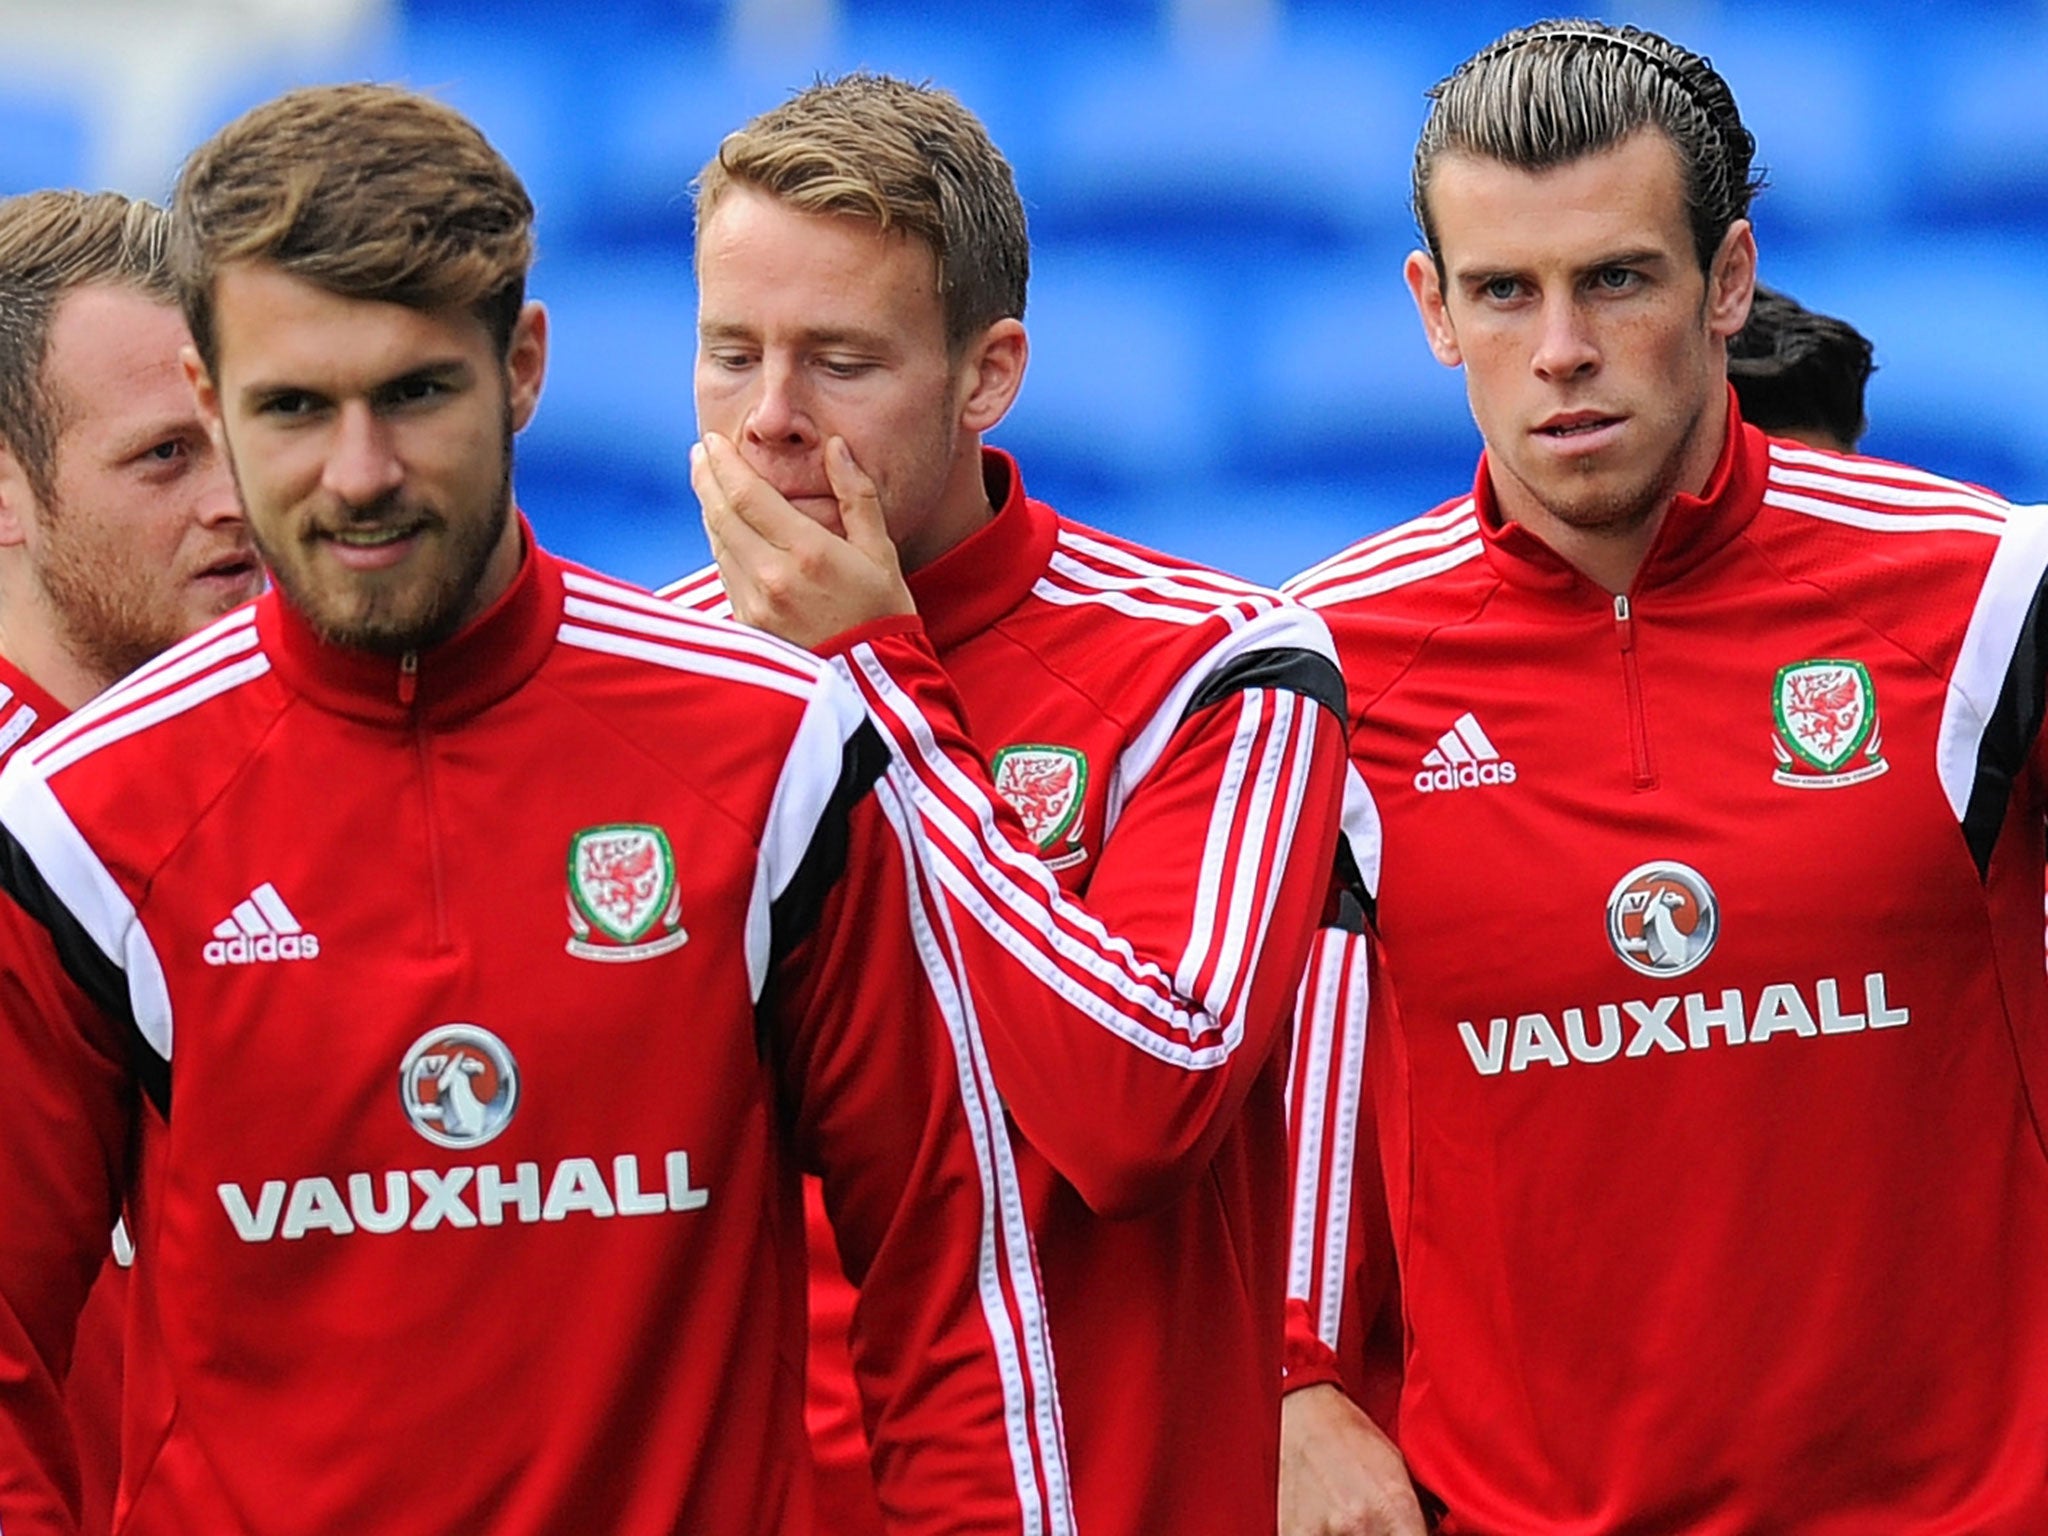 Aaron Ramsey (left) and Gareth Bale during Wales' training